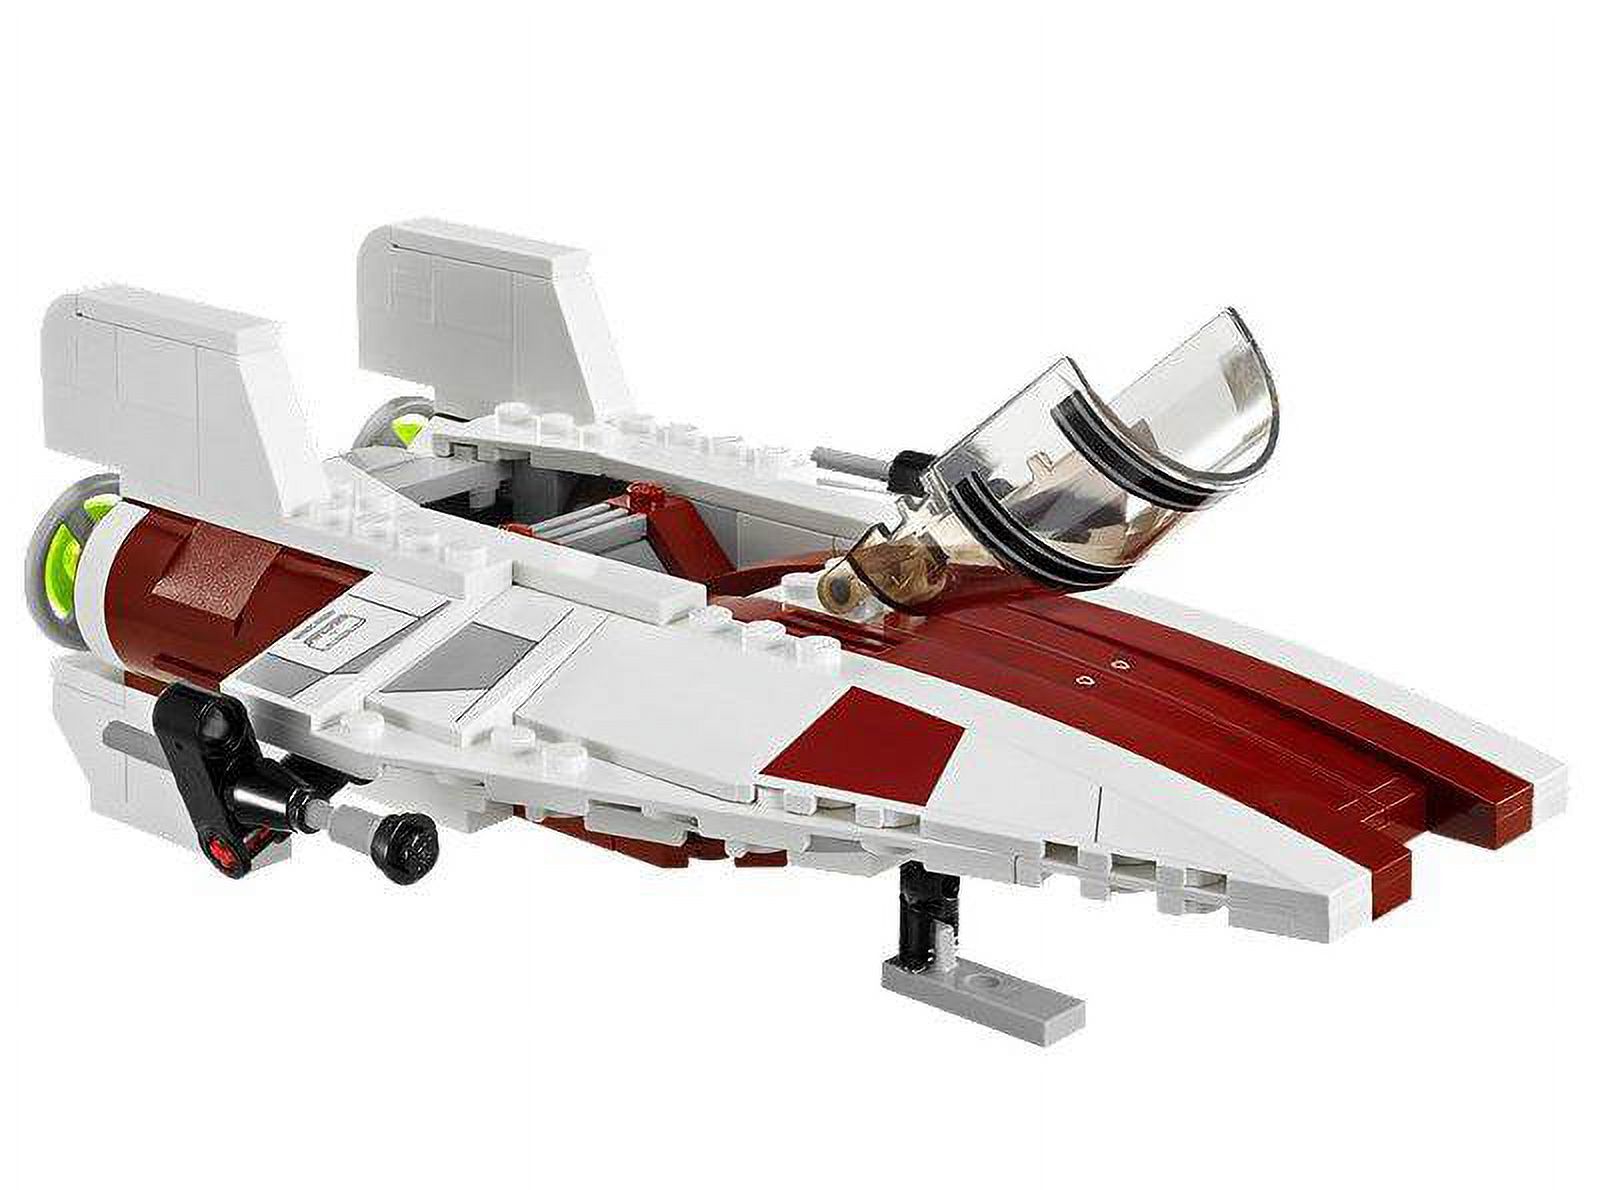 LEGO Star Wars A-wing Starfighter Play Set - image 4 of 7